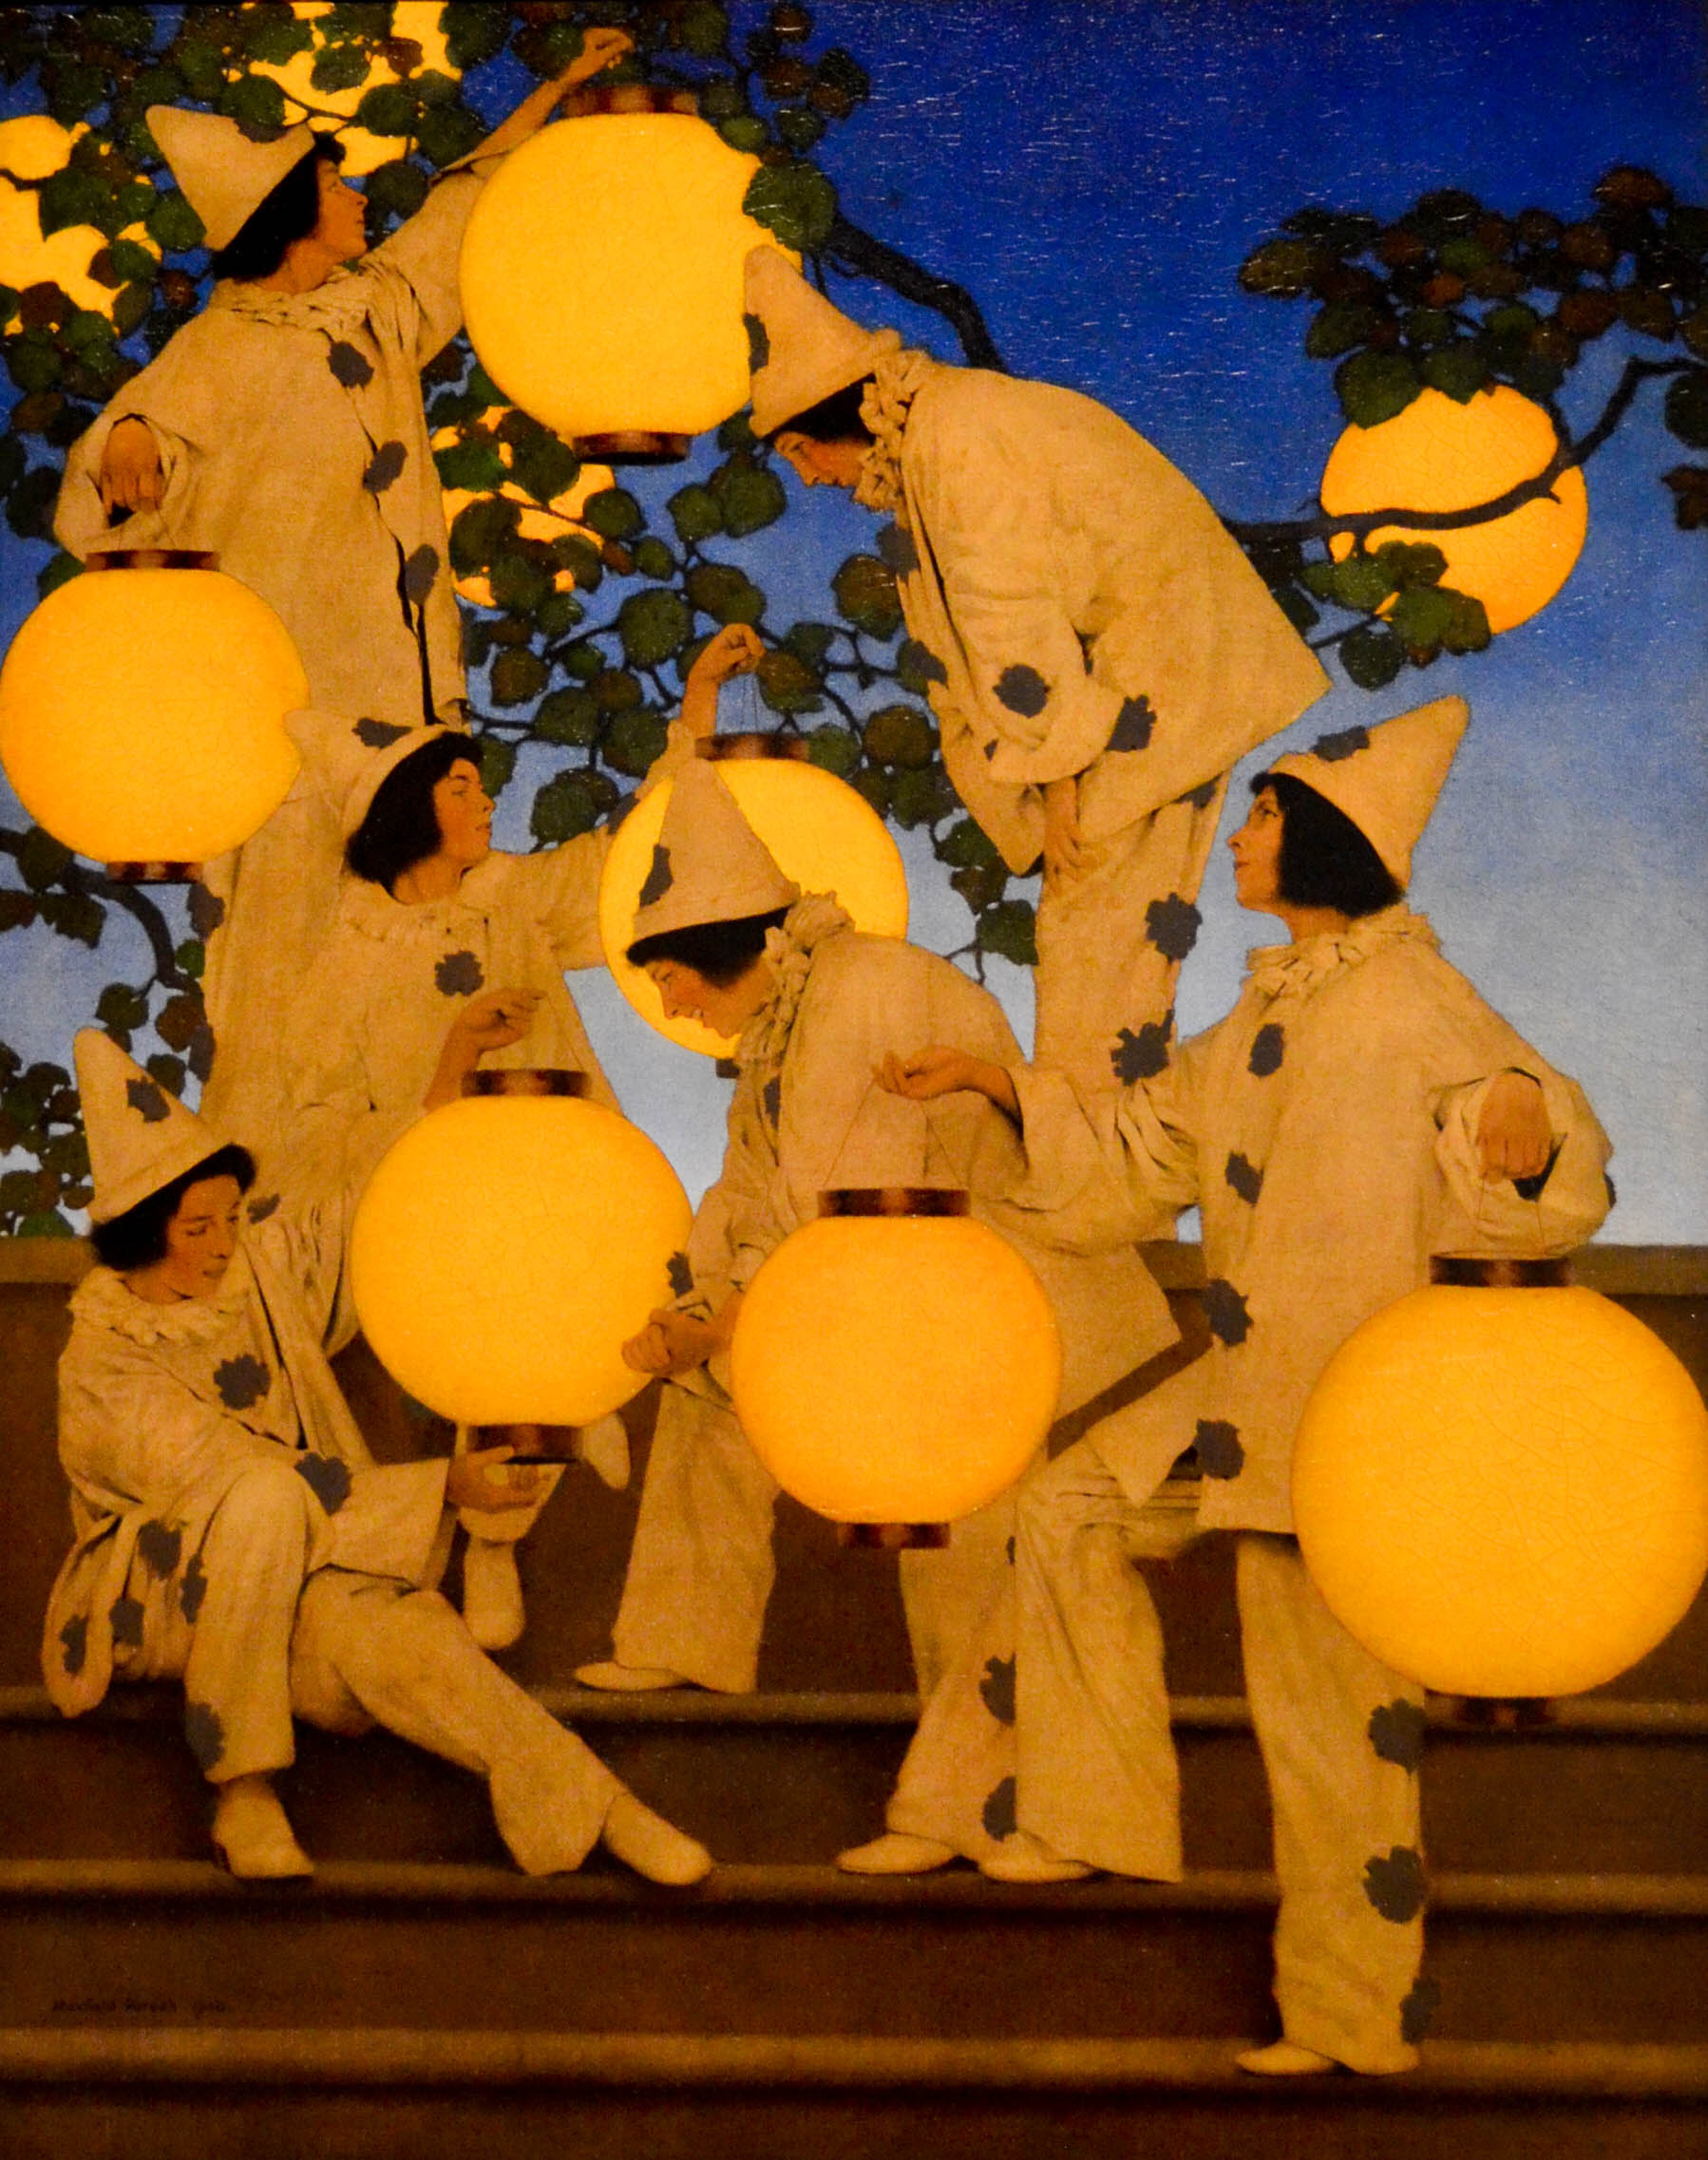 "The Lantern Bearers" by Maxfield Parrish, 1908.